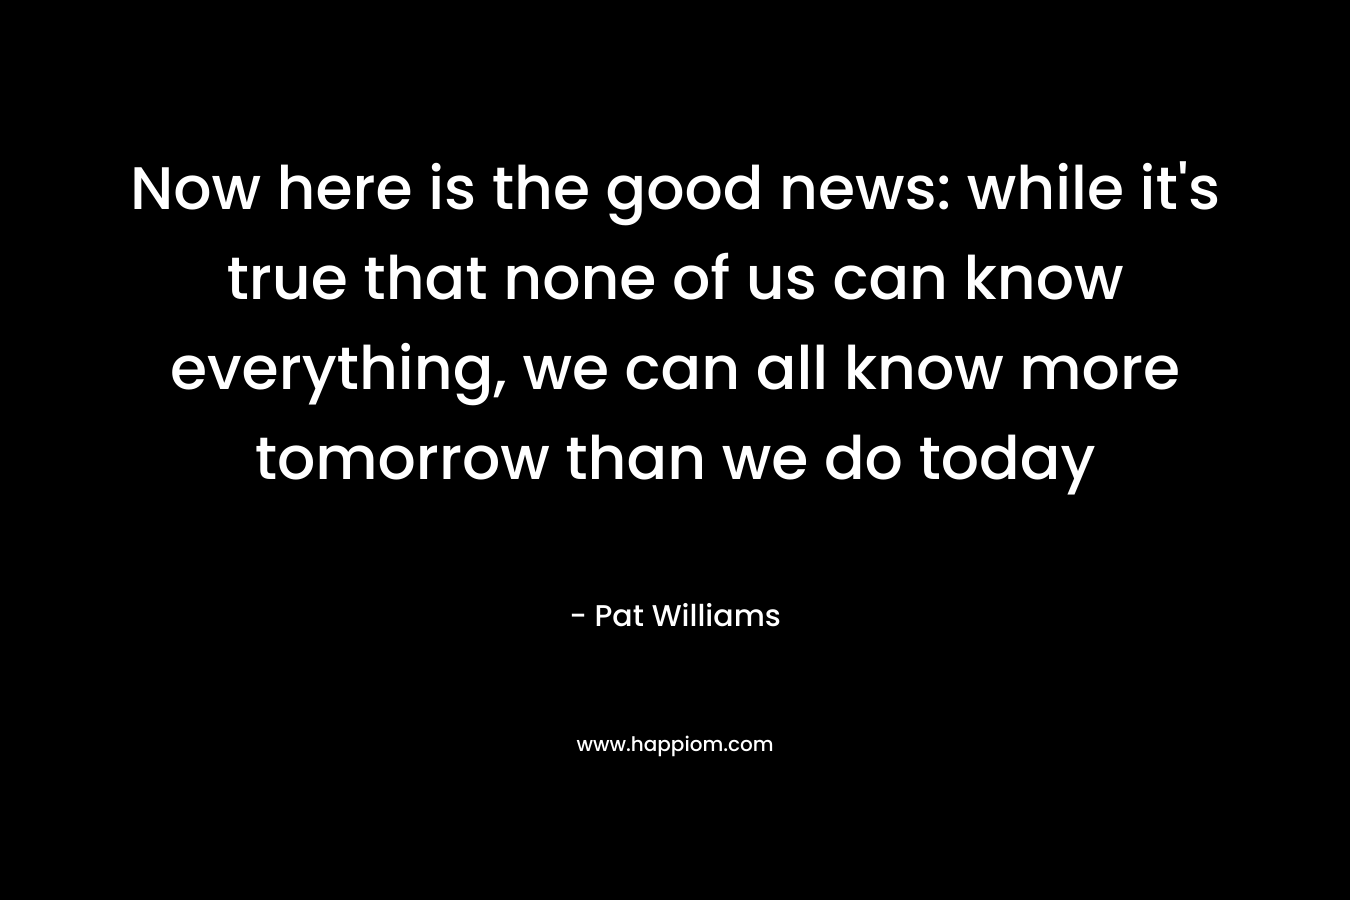 Now here is the good news: while it’s true that none of us can know everything, we can all know more tomorrow than we do today – Pat Williams